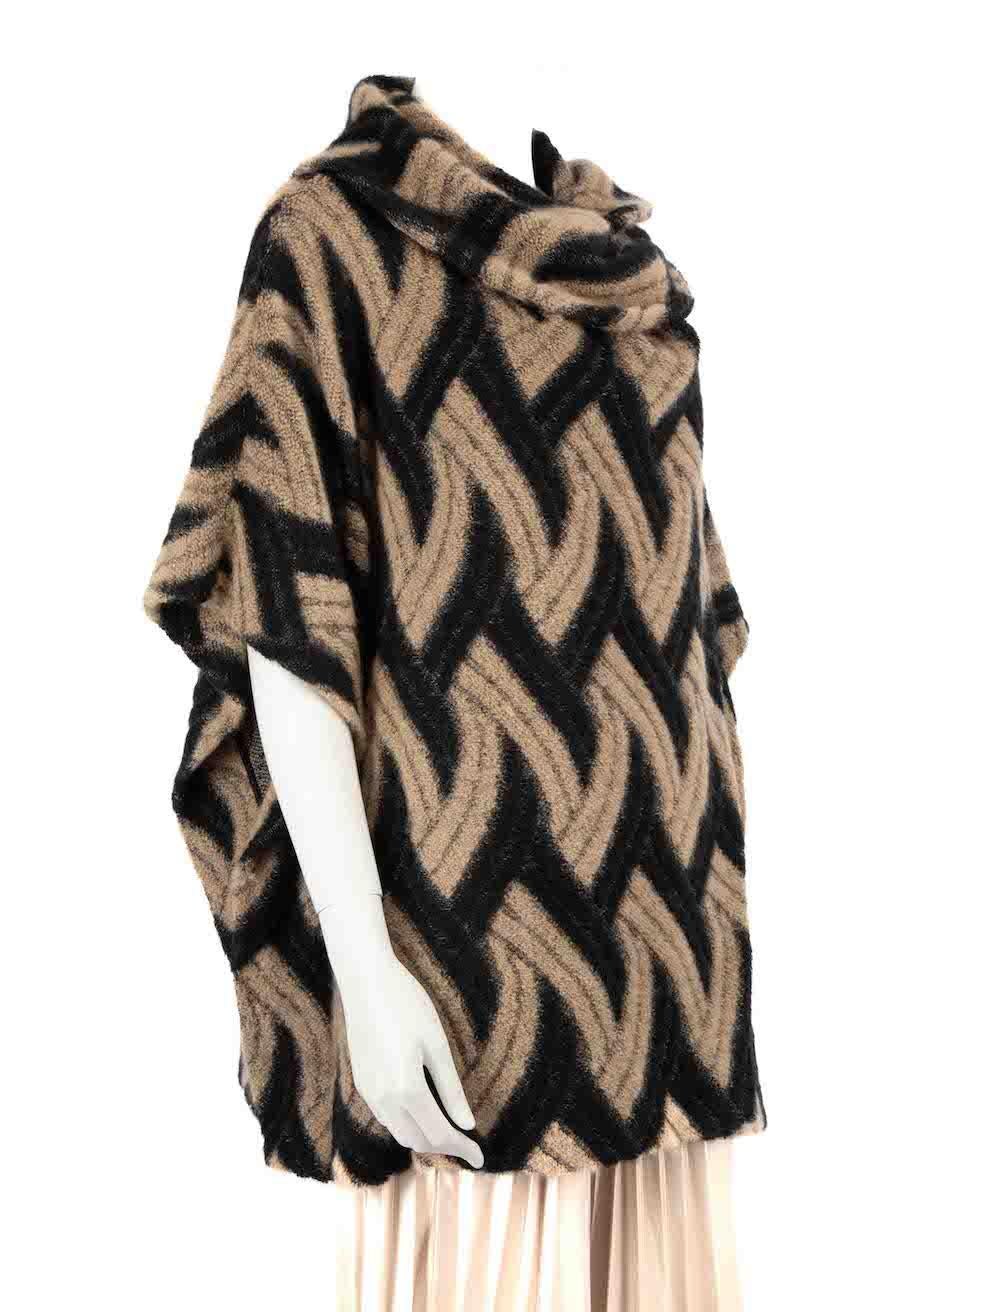 CONDITION is Very good. Minimal wear to cardigan is evident. Minimal wear to the centre-front with plucks to the knit on this used Missoni designer resale item.
 
 
 
 Details
 
 
 Brown
 
 Mohair
 
 Knit cardigan
 
 Zigzag pattern
 
 Snap button